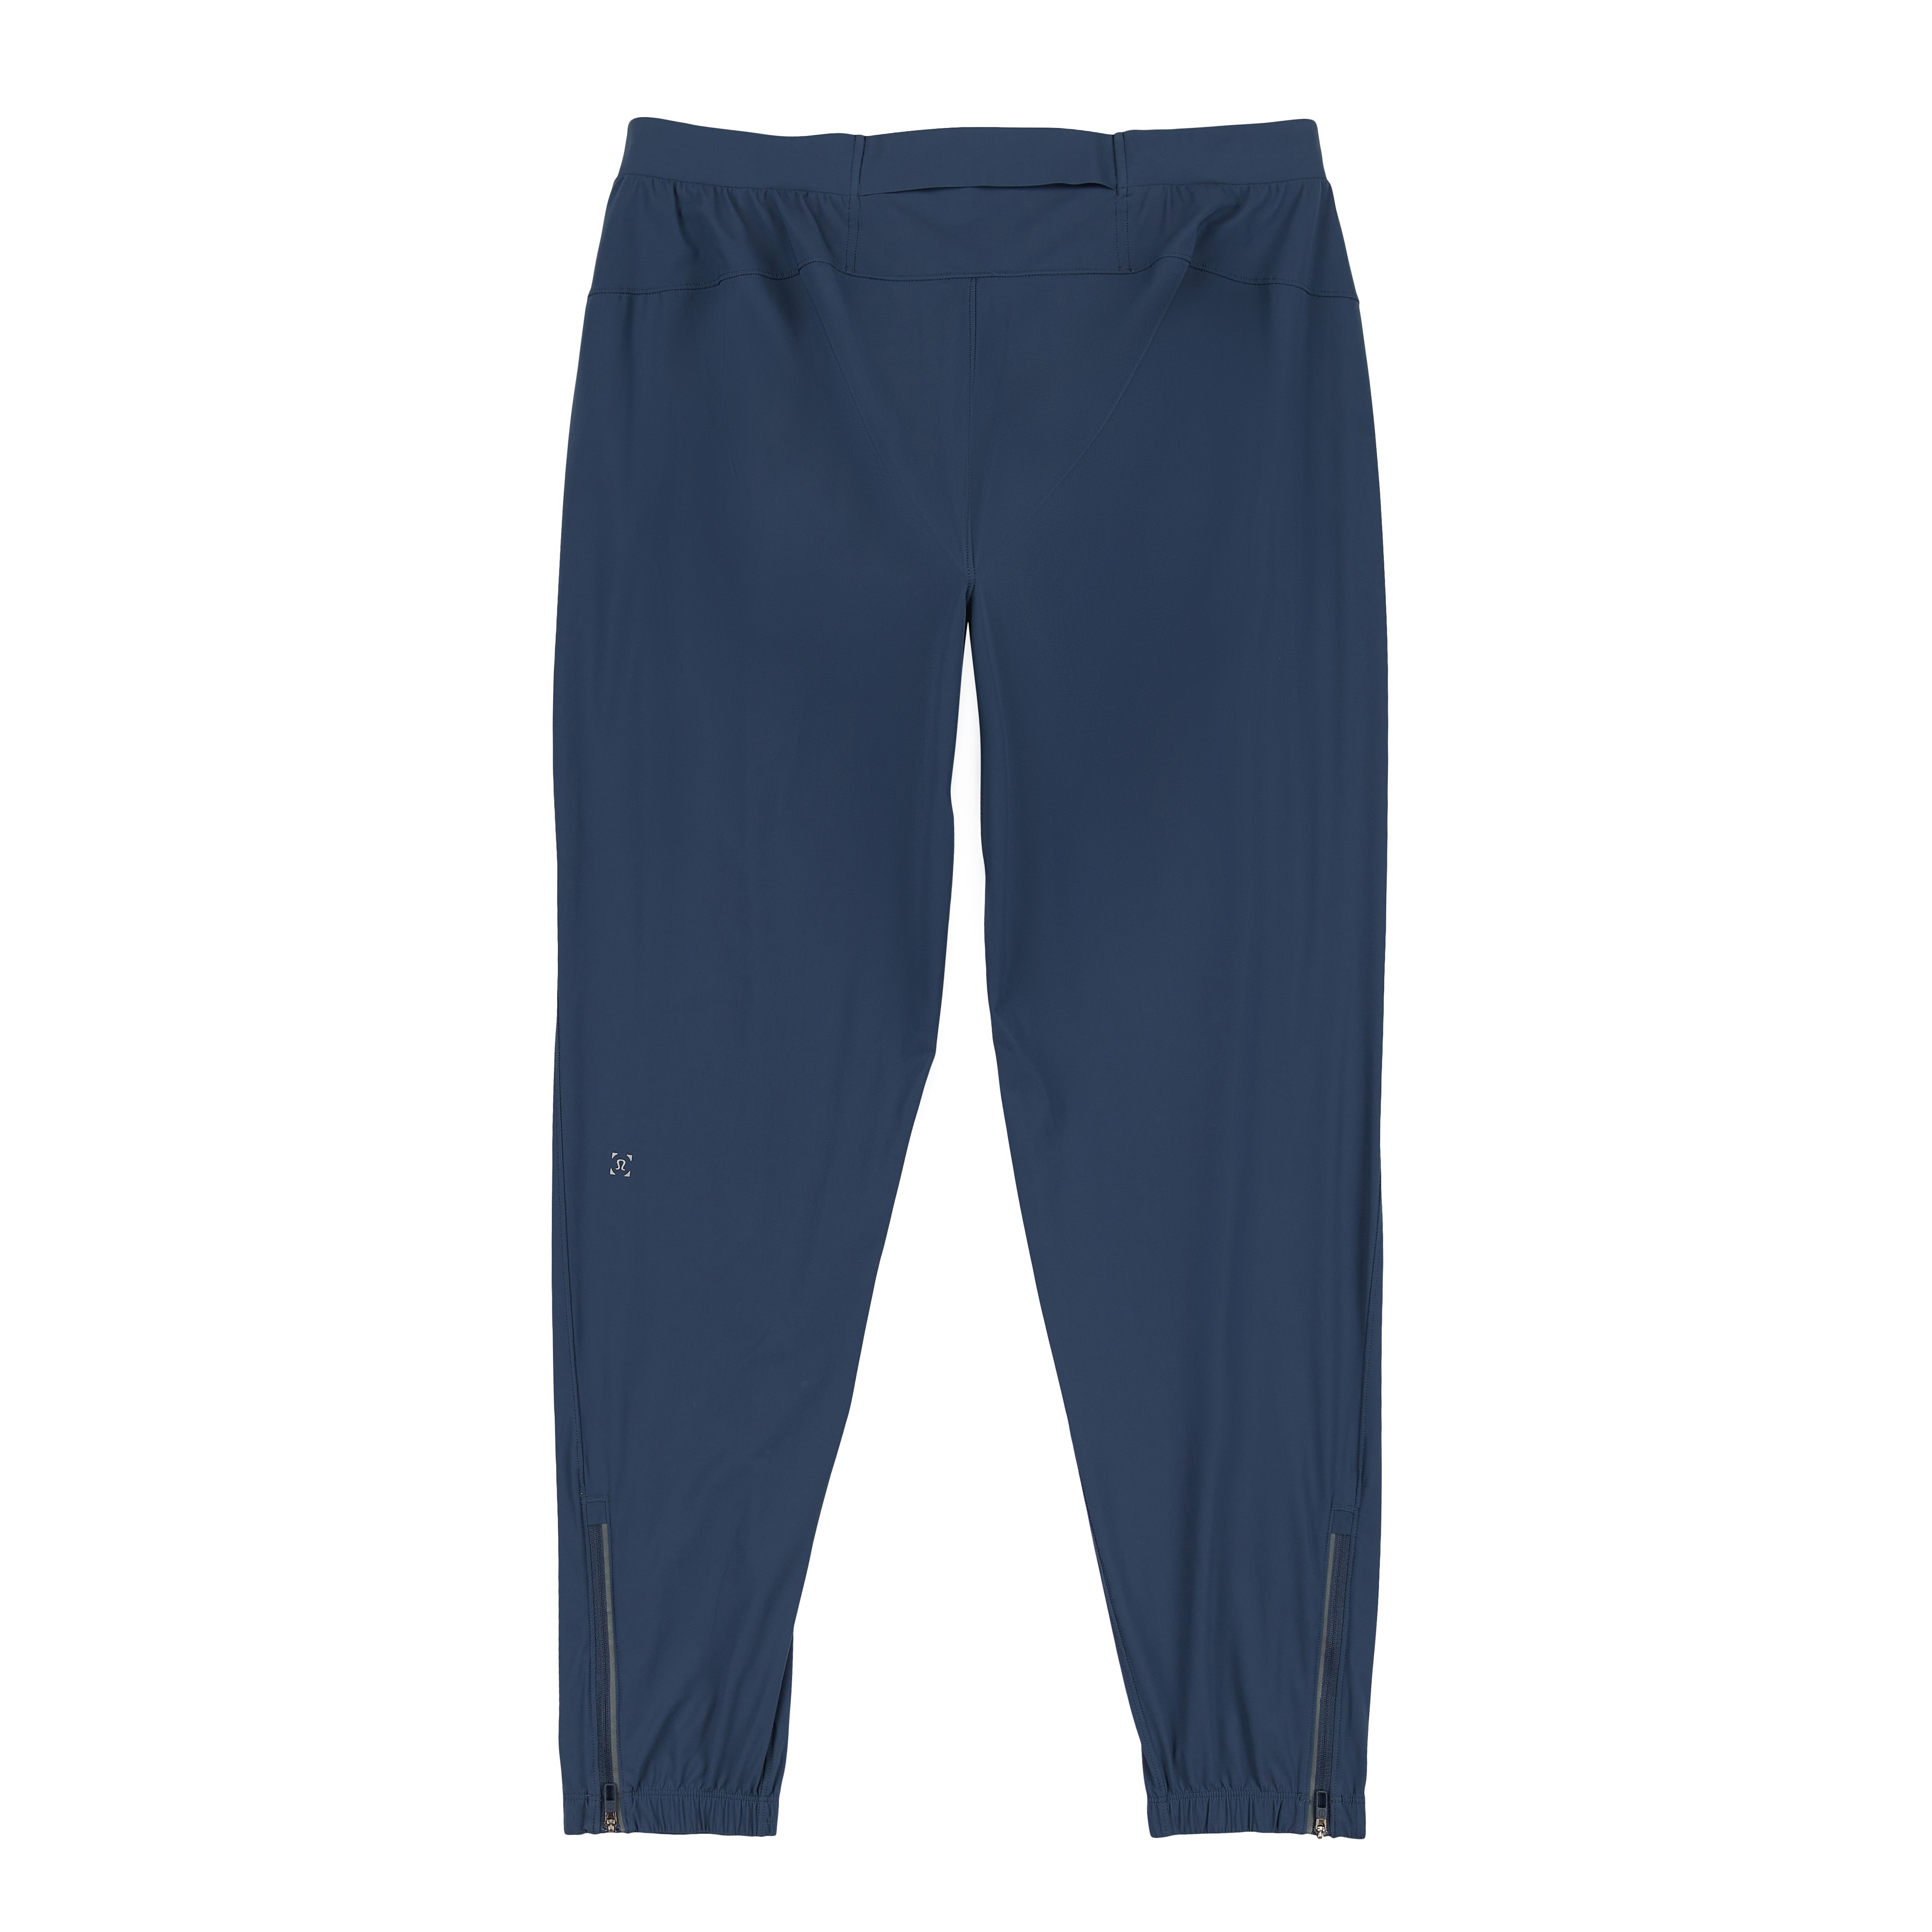 Lululemon SURGE JOGGER 29 Size S Navy Men FREE POST Brand New With Tags  LM5956S